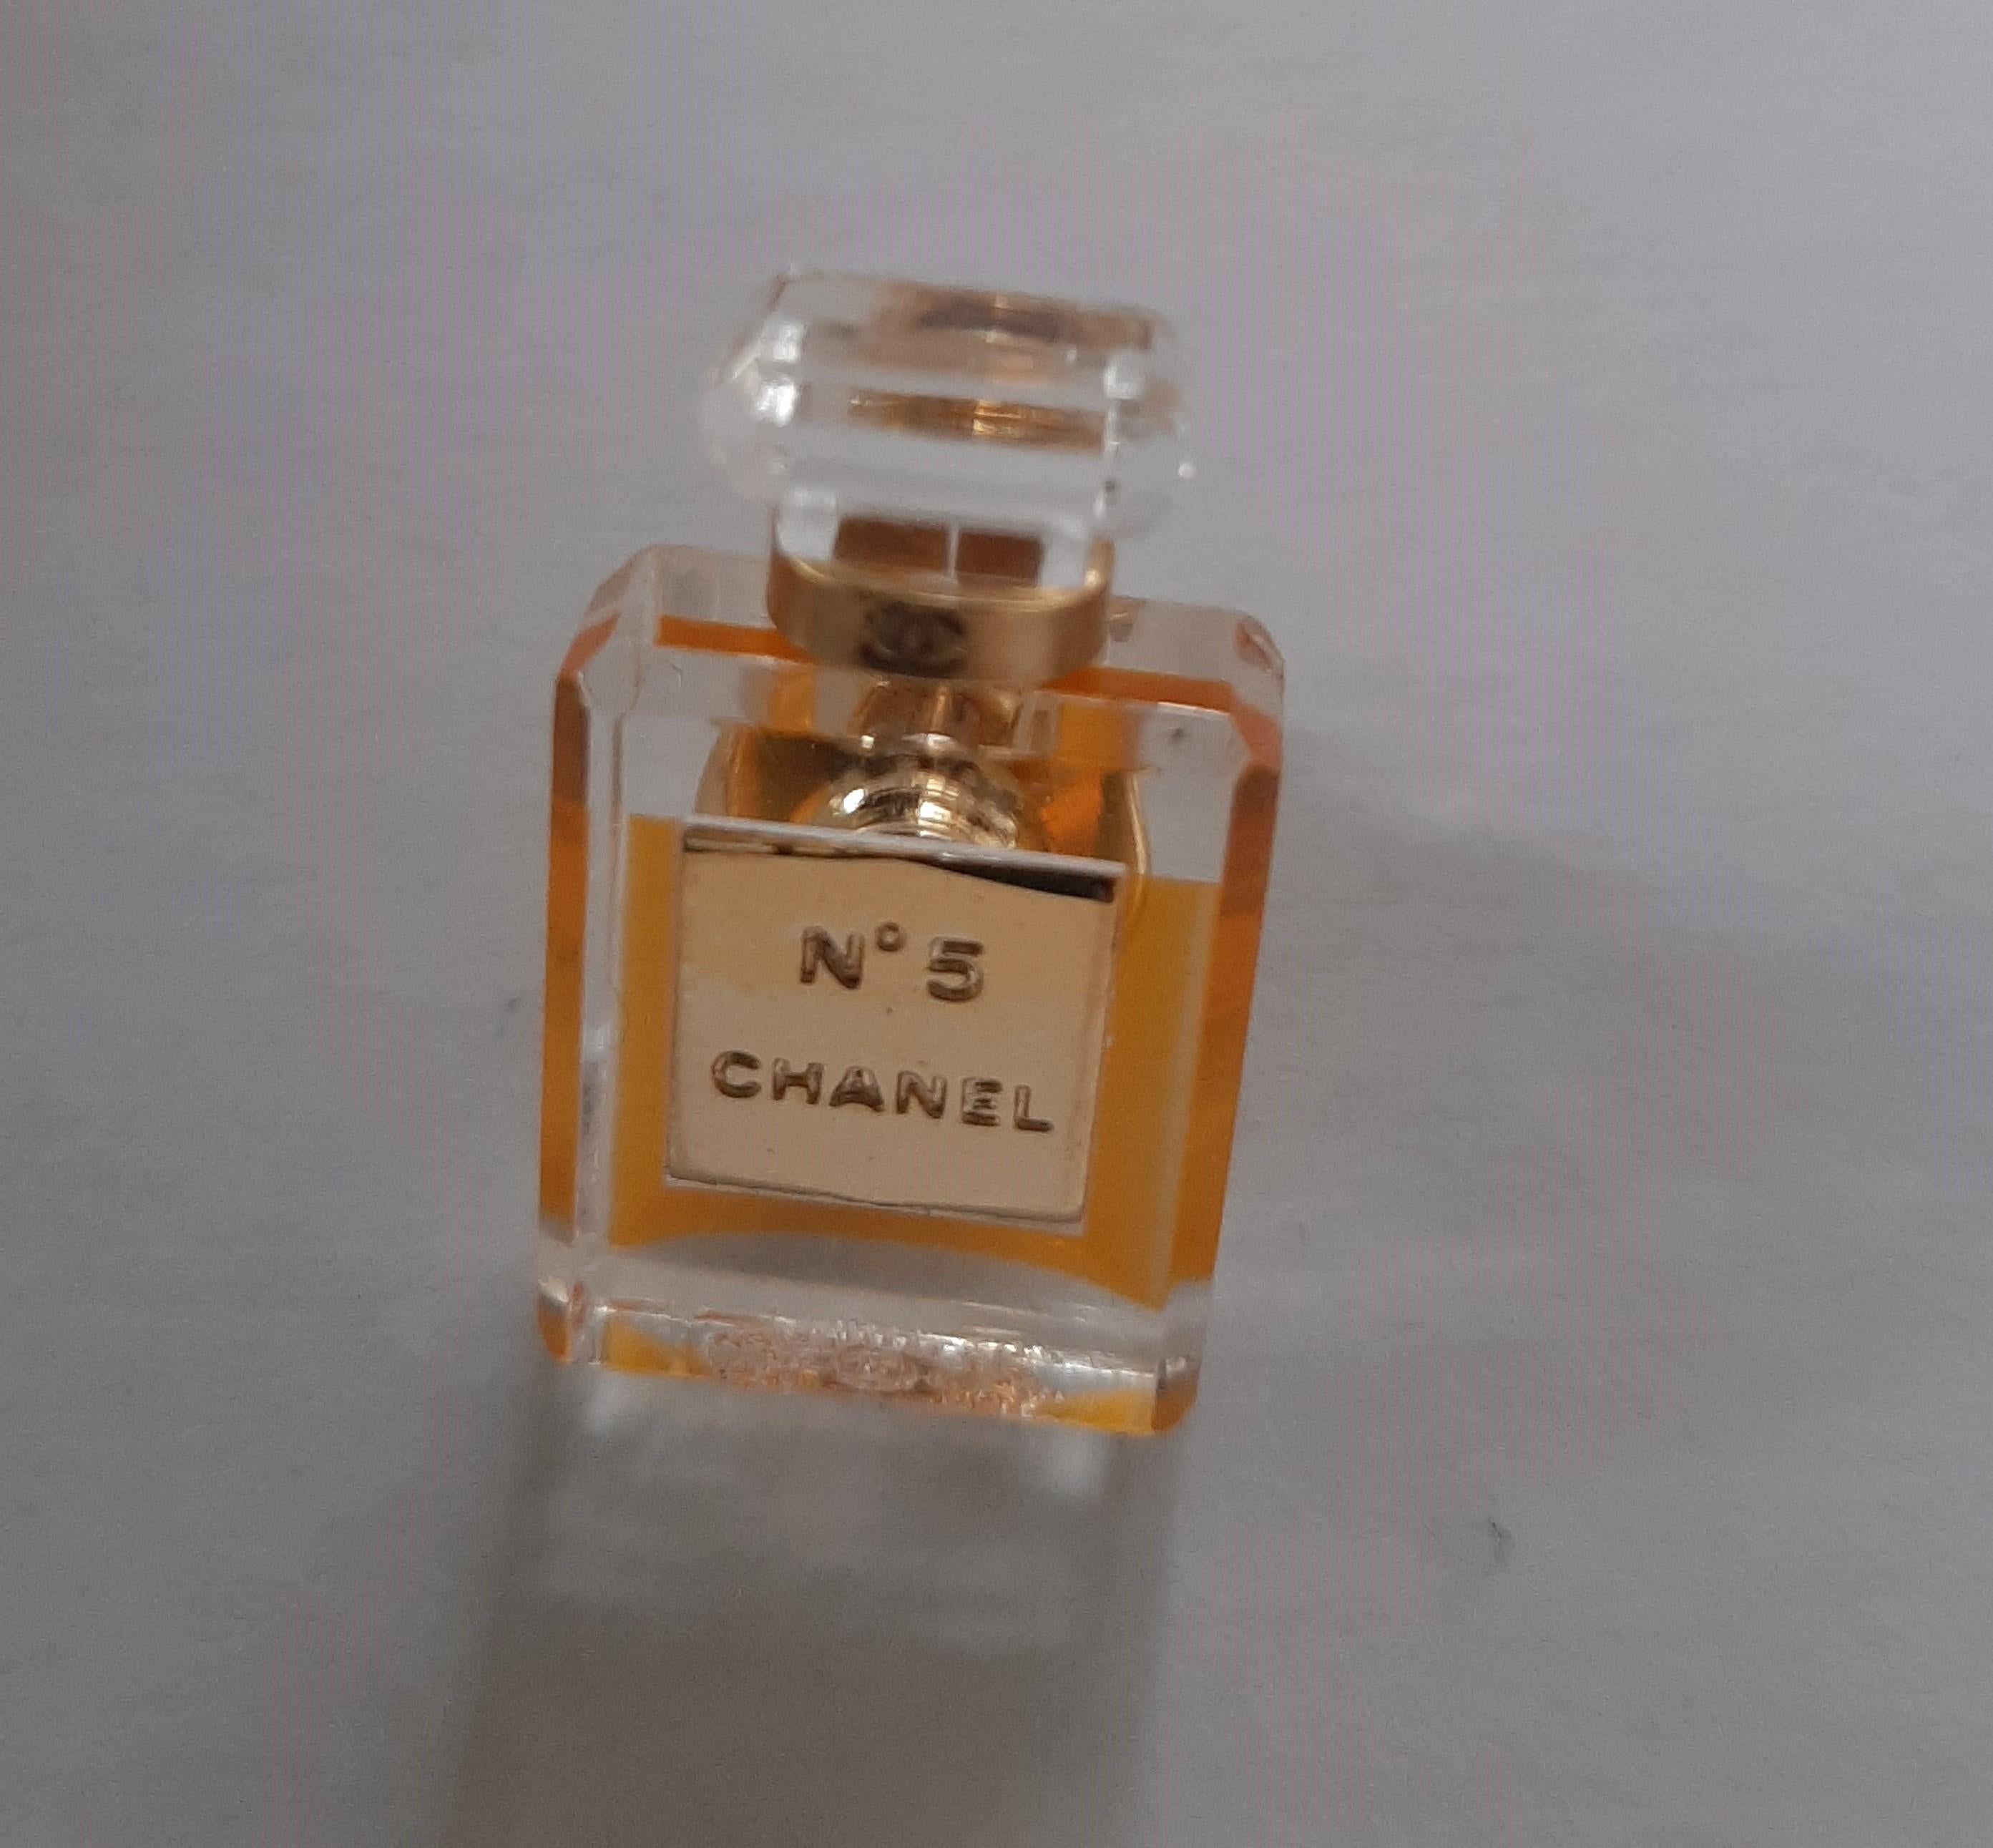 A Pin Brooch Vintage Iconic Coco Chanel No.5 Bottle Perfume 2